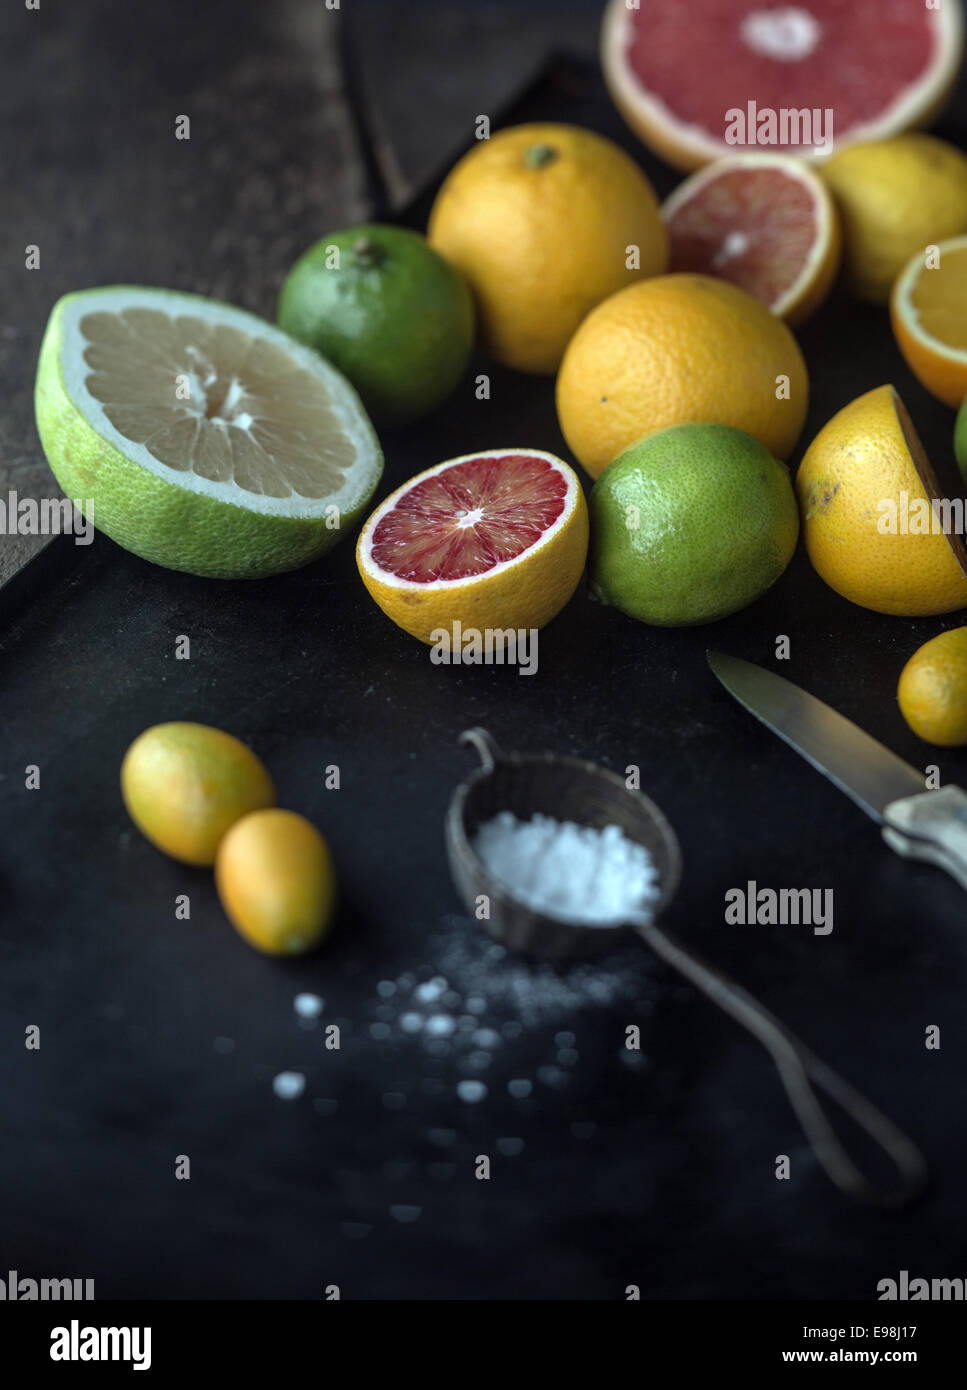 Preparing assorted citrus fruit for dessert with whole and halved grapefruit, oranges, limes, lemon and kumquat on a rustic kitchen counter with powdered sugar and a knife Stock Photo